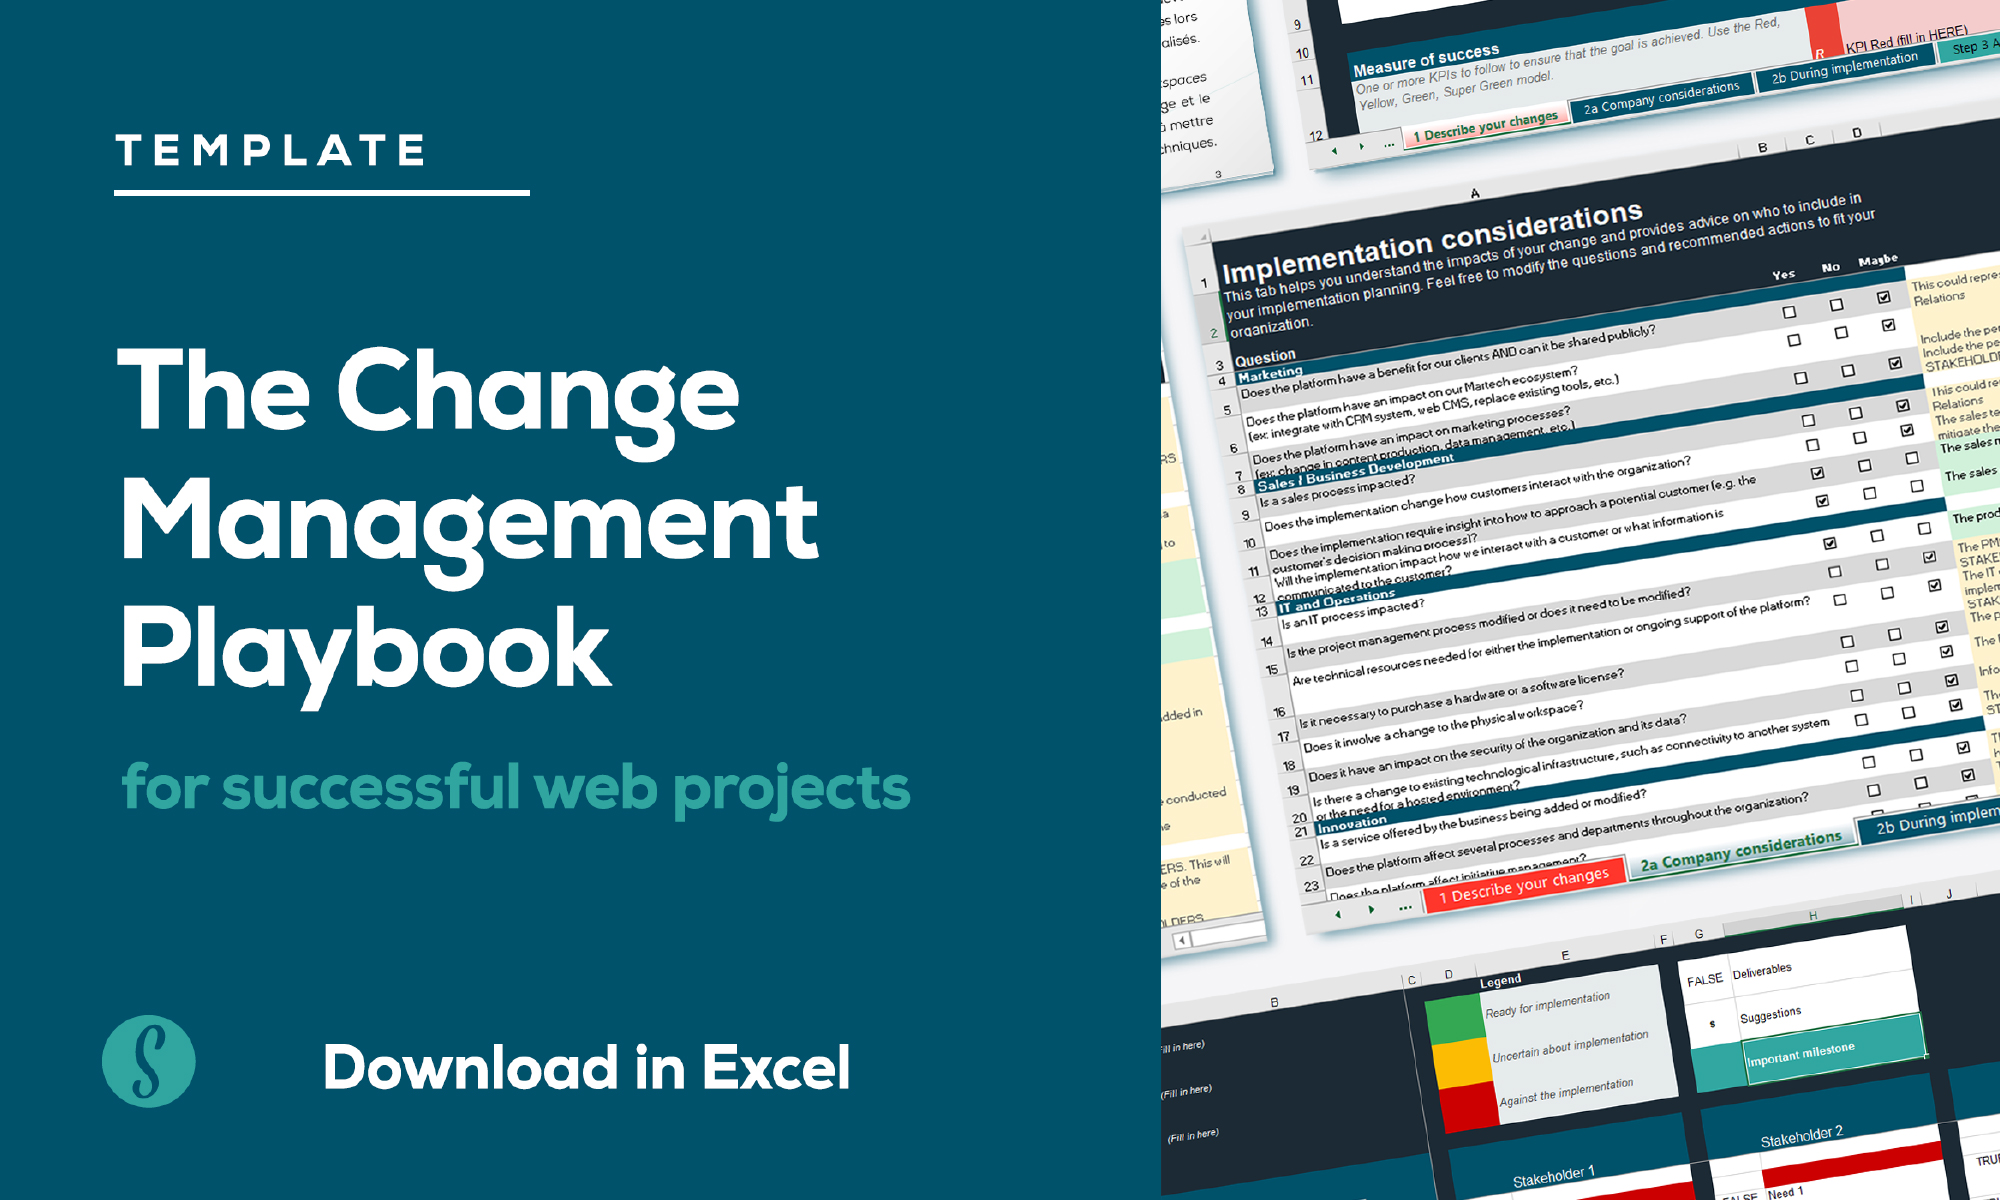 Align your stakeholders with the Change Management Playbook